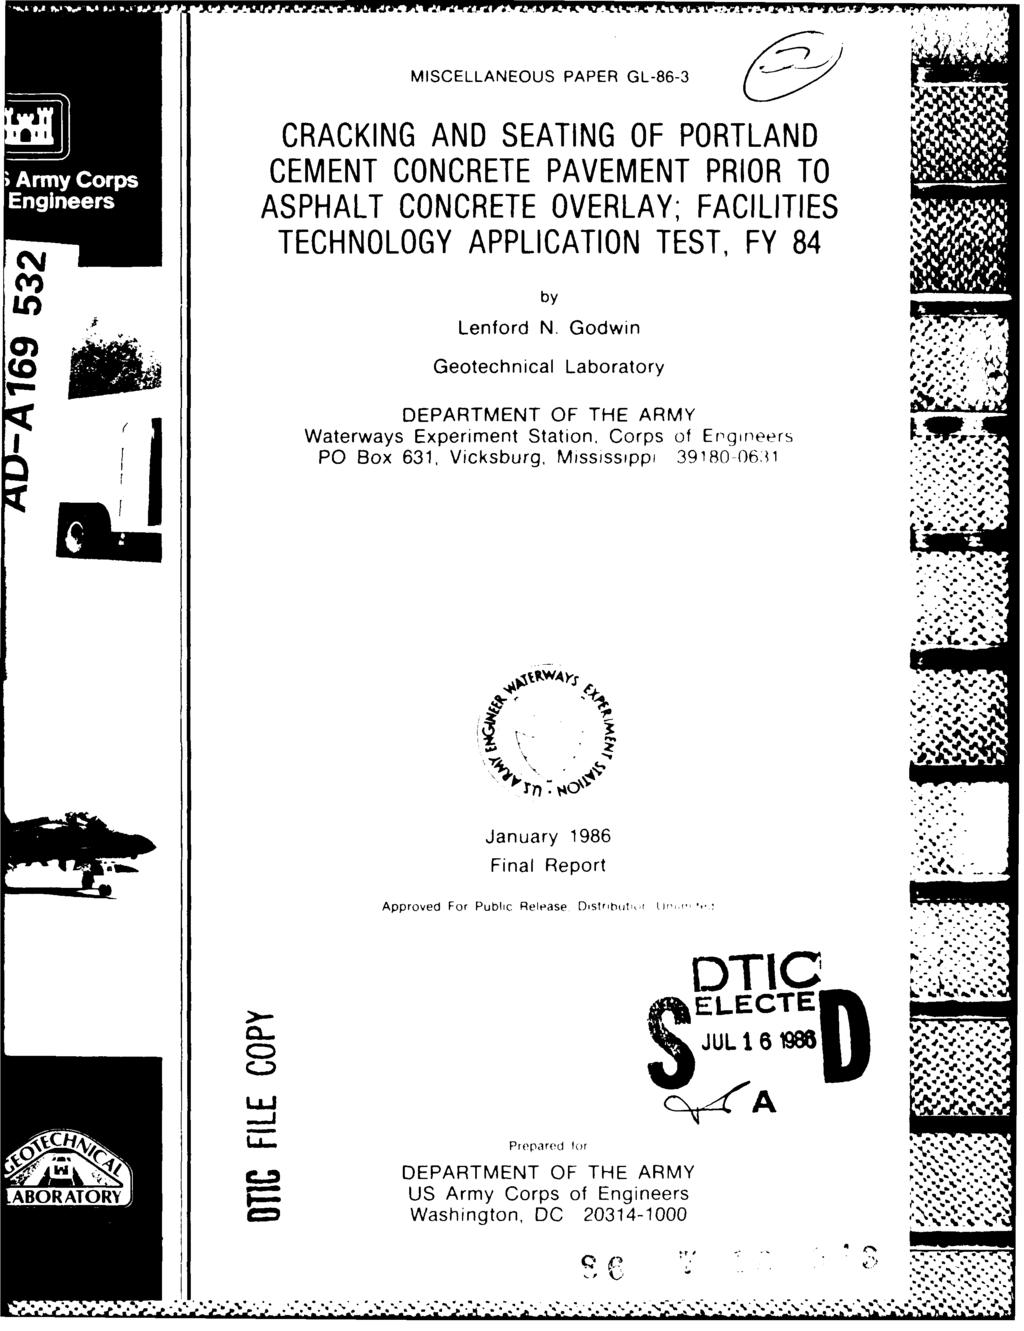 MISCELLANEOUS PAPER GL-86-3 (V) mlcracking AND SEATING OF PORTLAND Arm Cop CEMENT CONCRETE PAVEMENT PRIOR TO EngieersASPHALT CONCRETE OVERLAY; FACILITIES N TECHNOLOGY APPLICATION TEST, FY 84 by